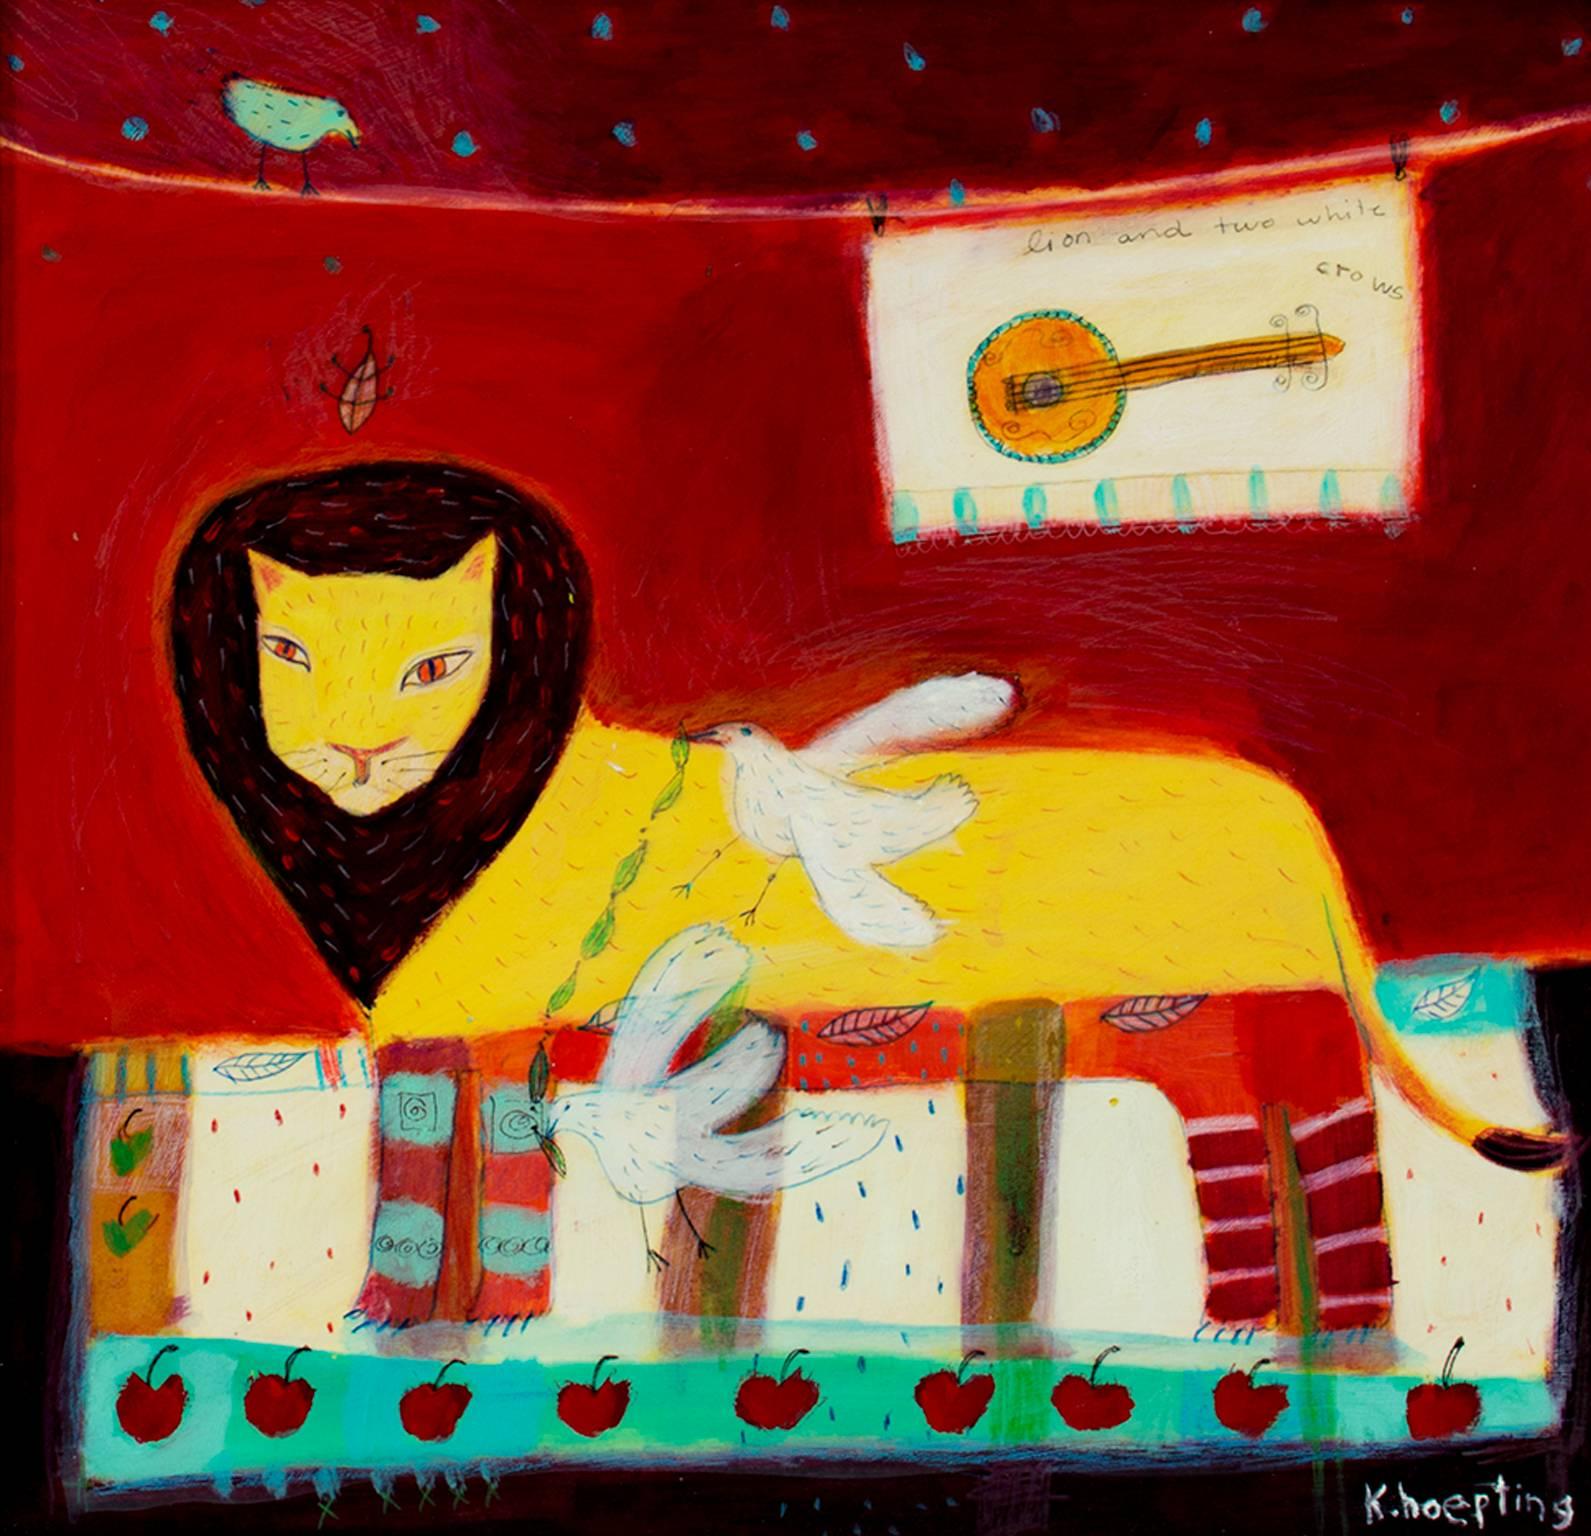 "Lion & Two White Crows" is an original acrylic painting on paper mounted on museum foamboard. It depicts a yellow lion and two white crows in front of a deep red background. There is also a musical instrument on a white towel hanging above, along